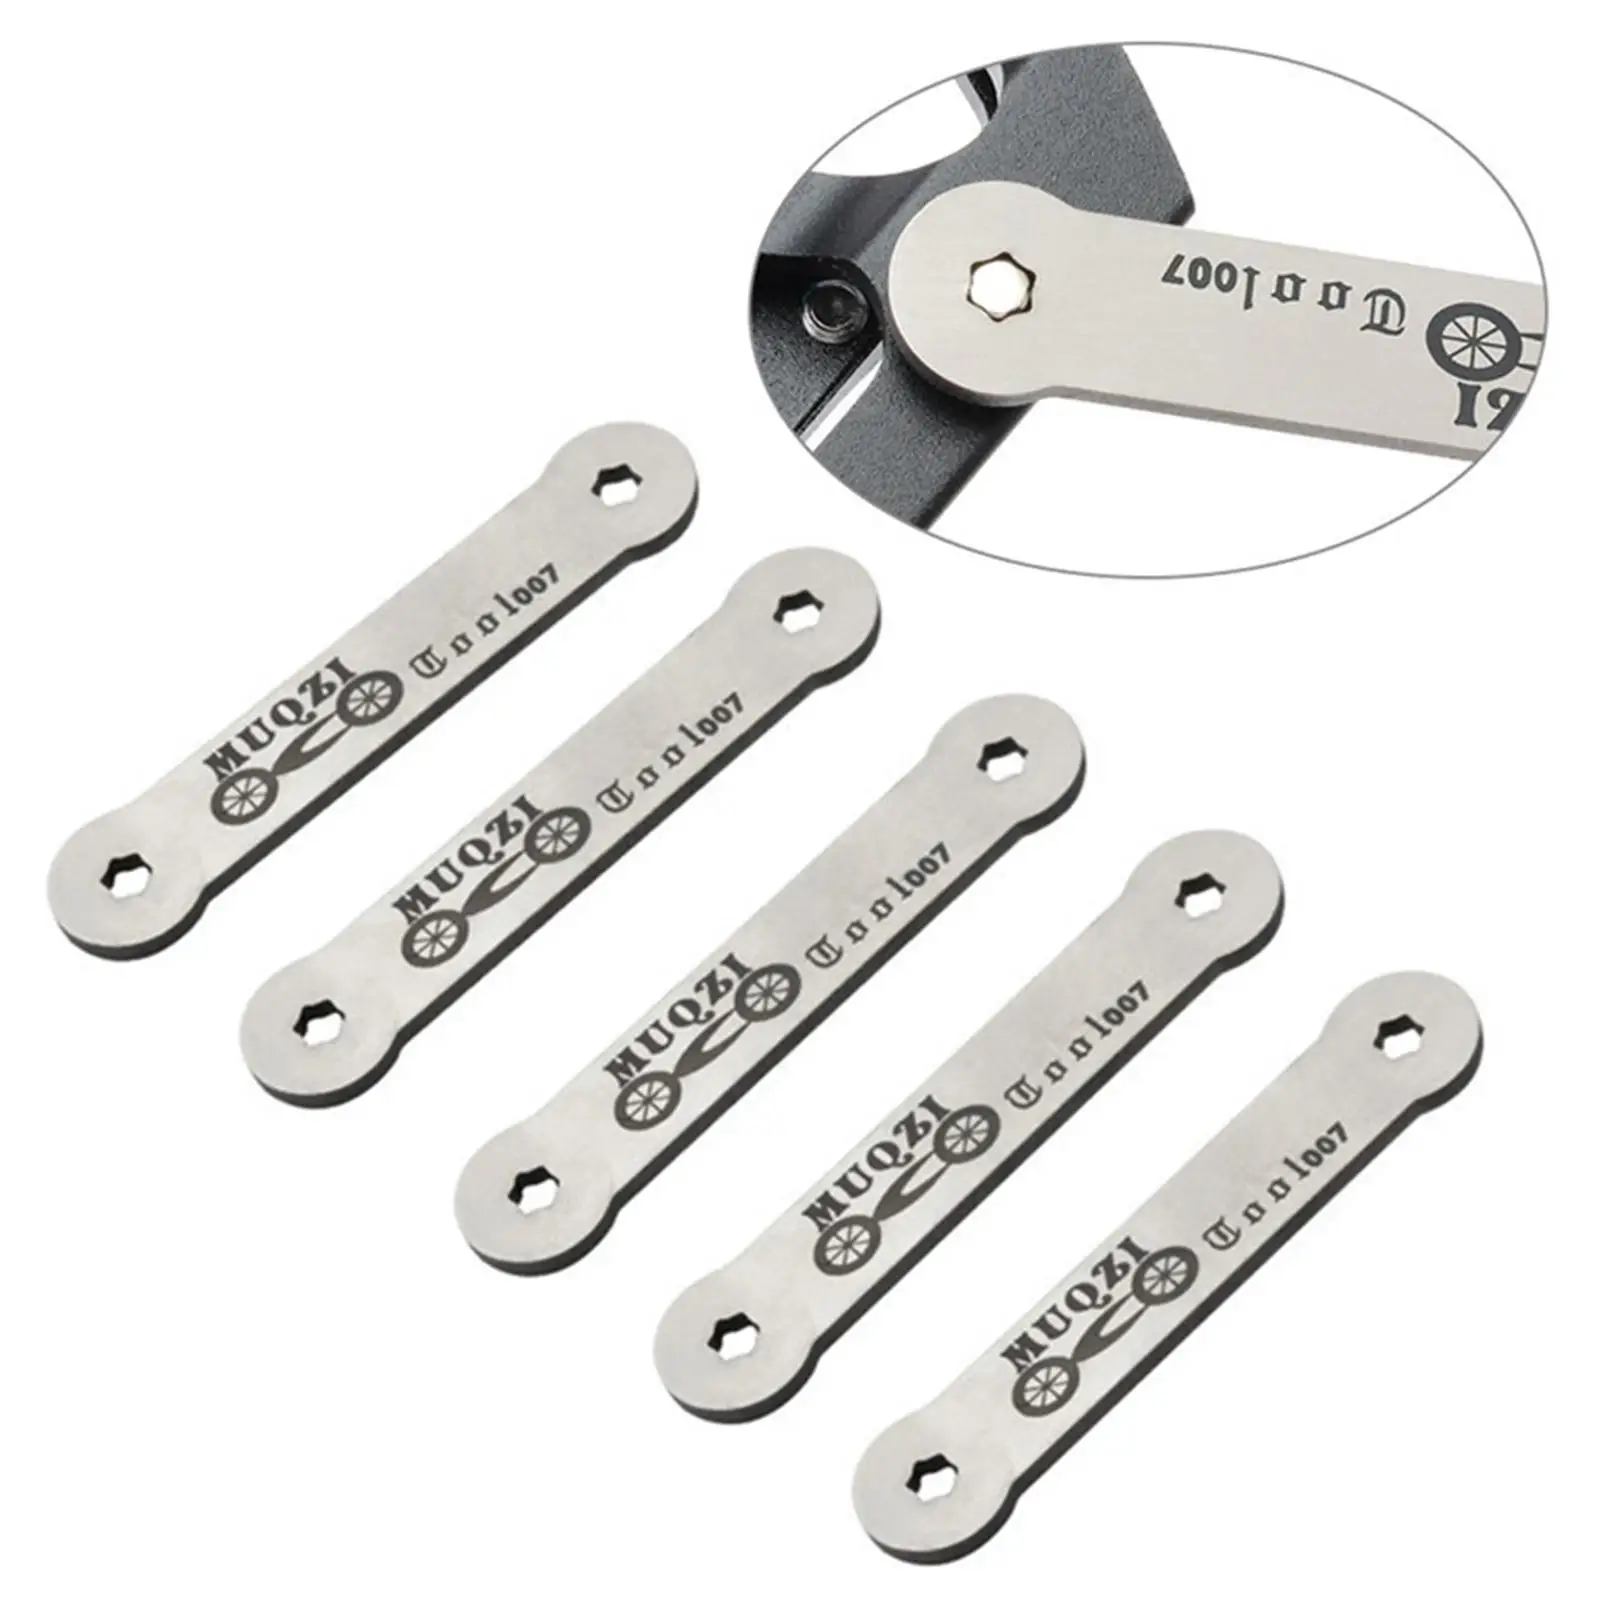 5 x Mountain Bike Pedal Wrench Bicycle Pedal Pins Pedal Wrench for Bike